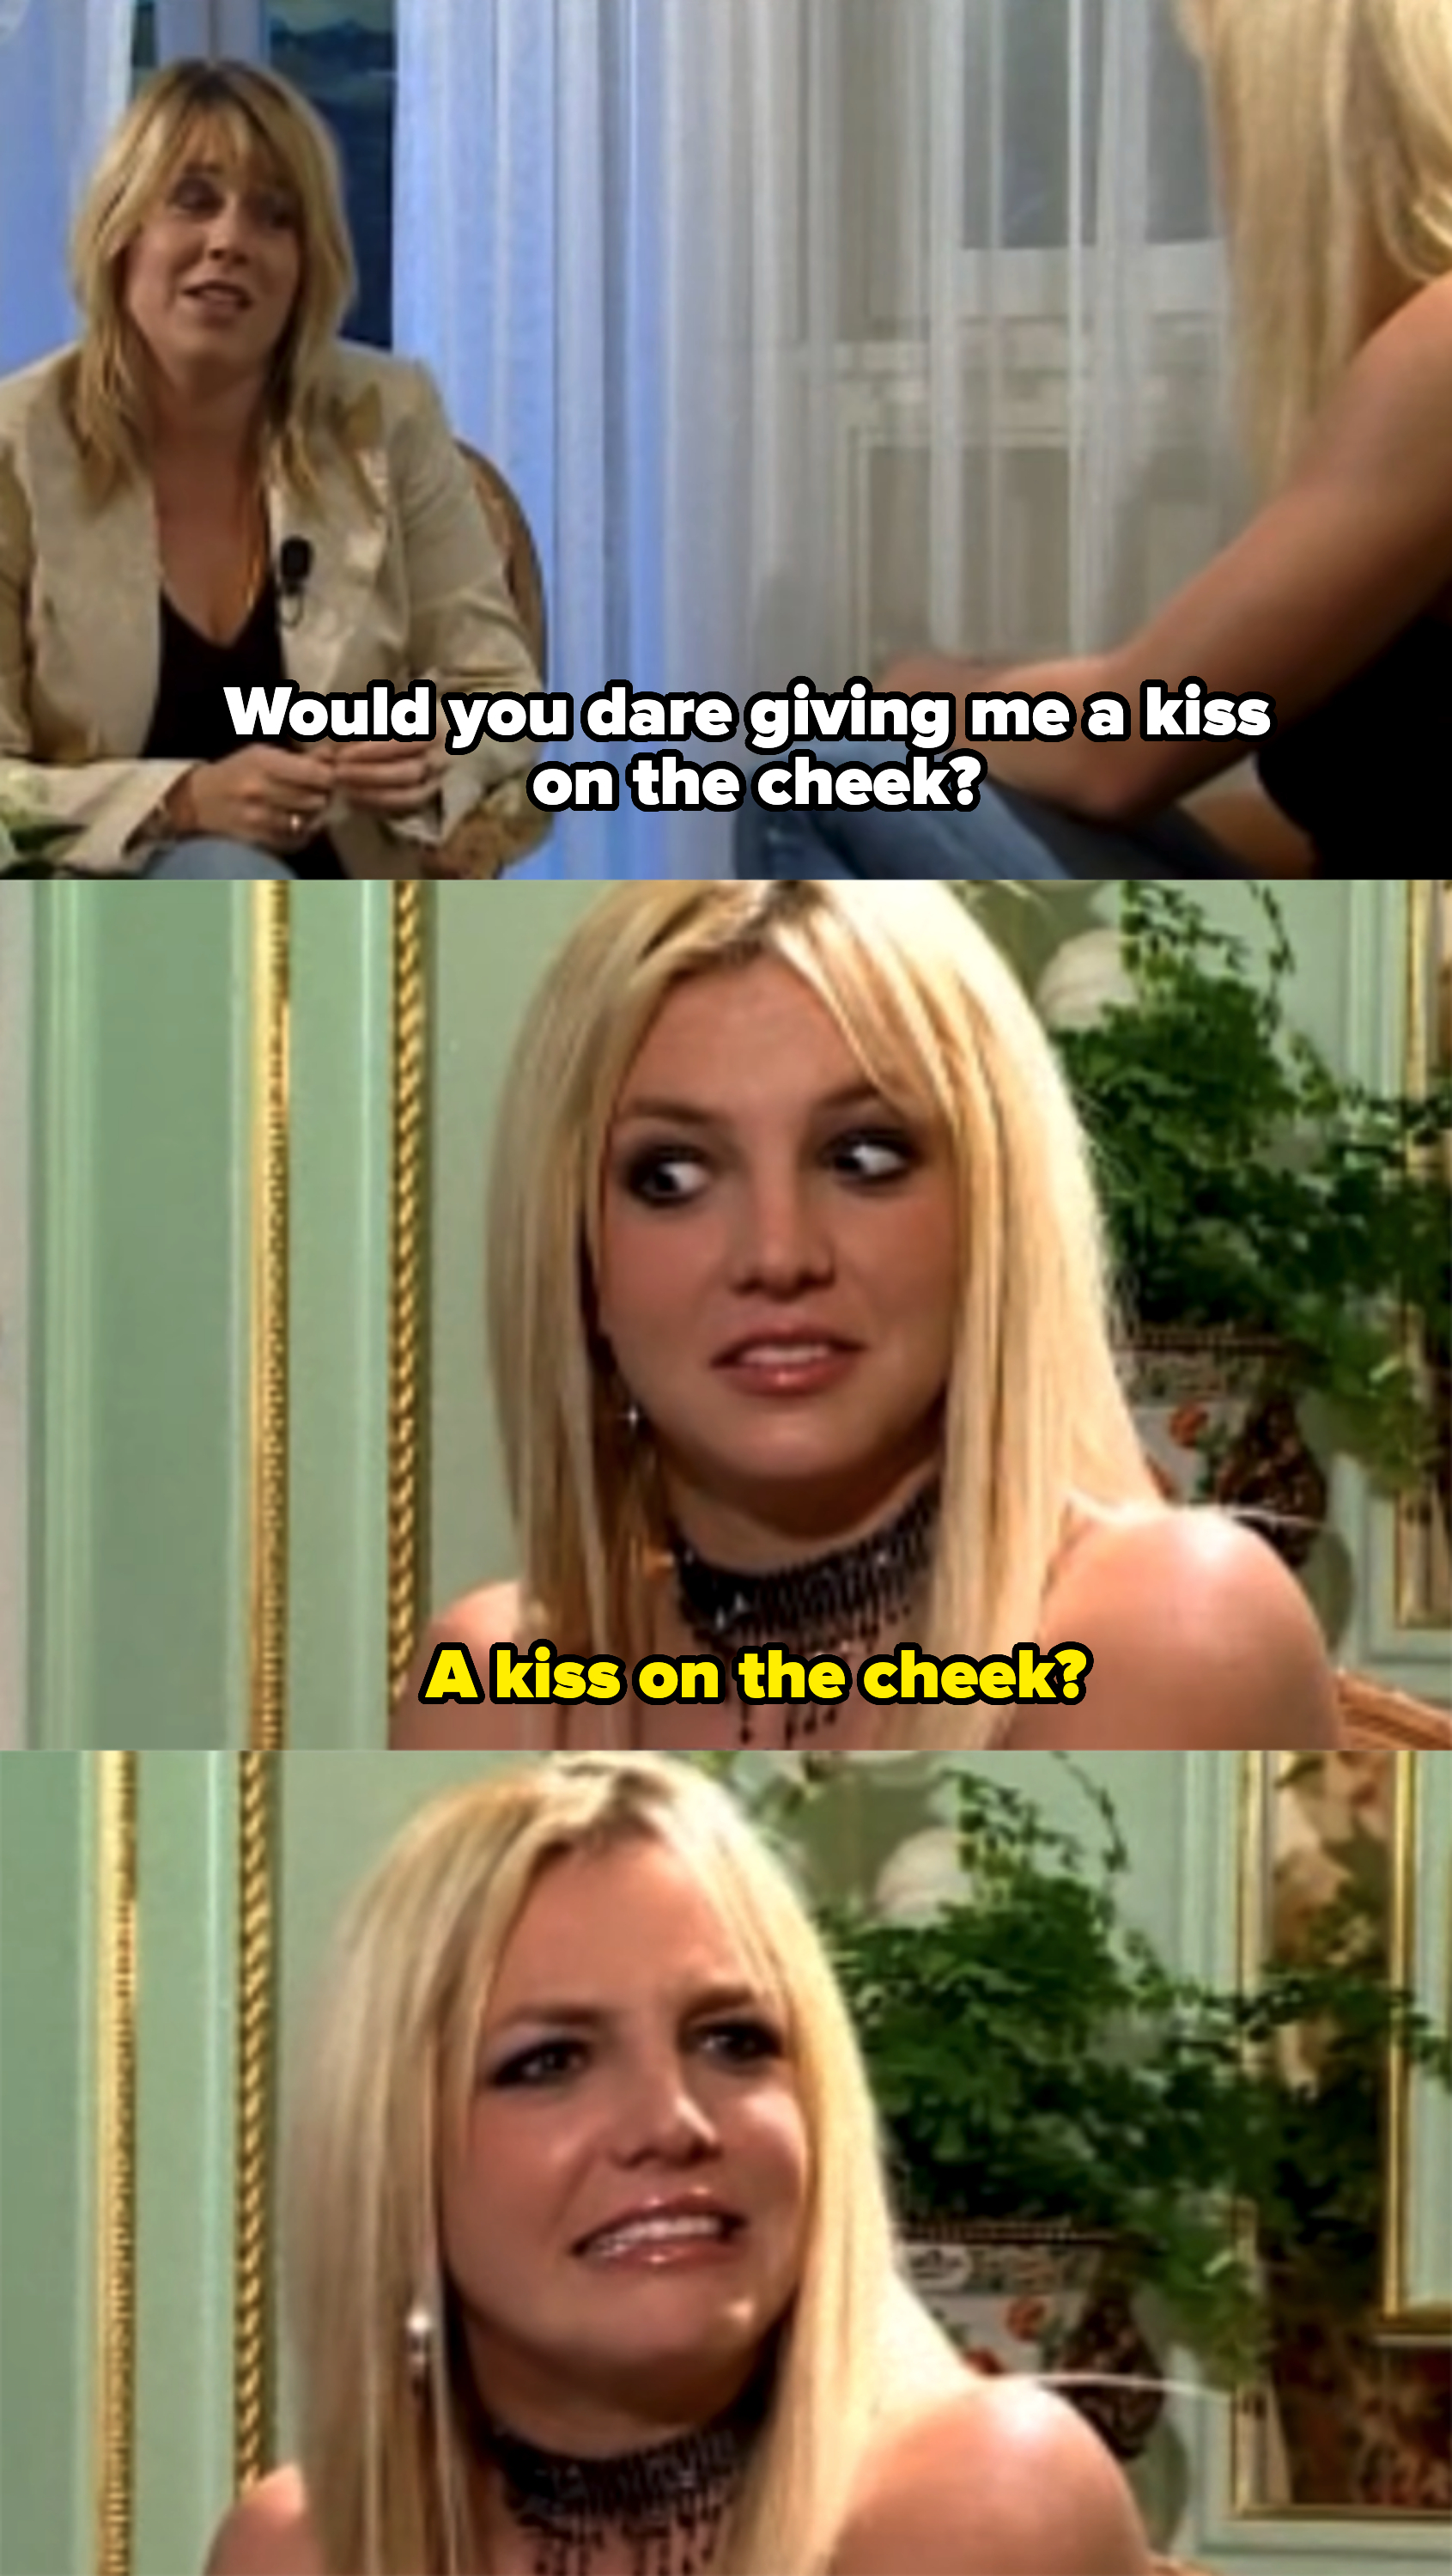 &quot;Would you dare giving me a kiss on the cheek?&quot; And Britney says &quot;A kiss on the cheek?&quot; and looks shocked and confused